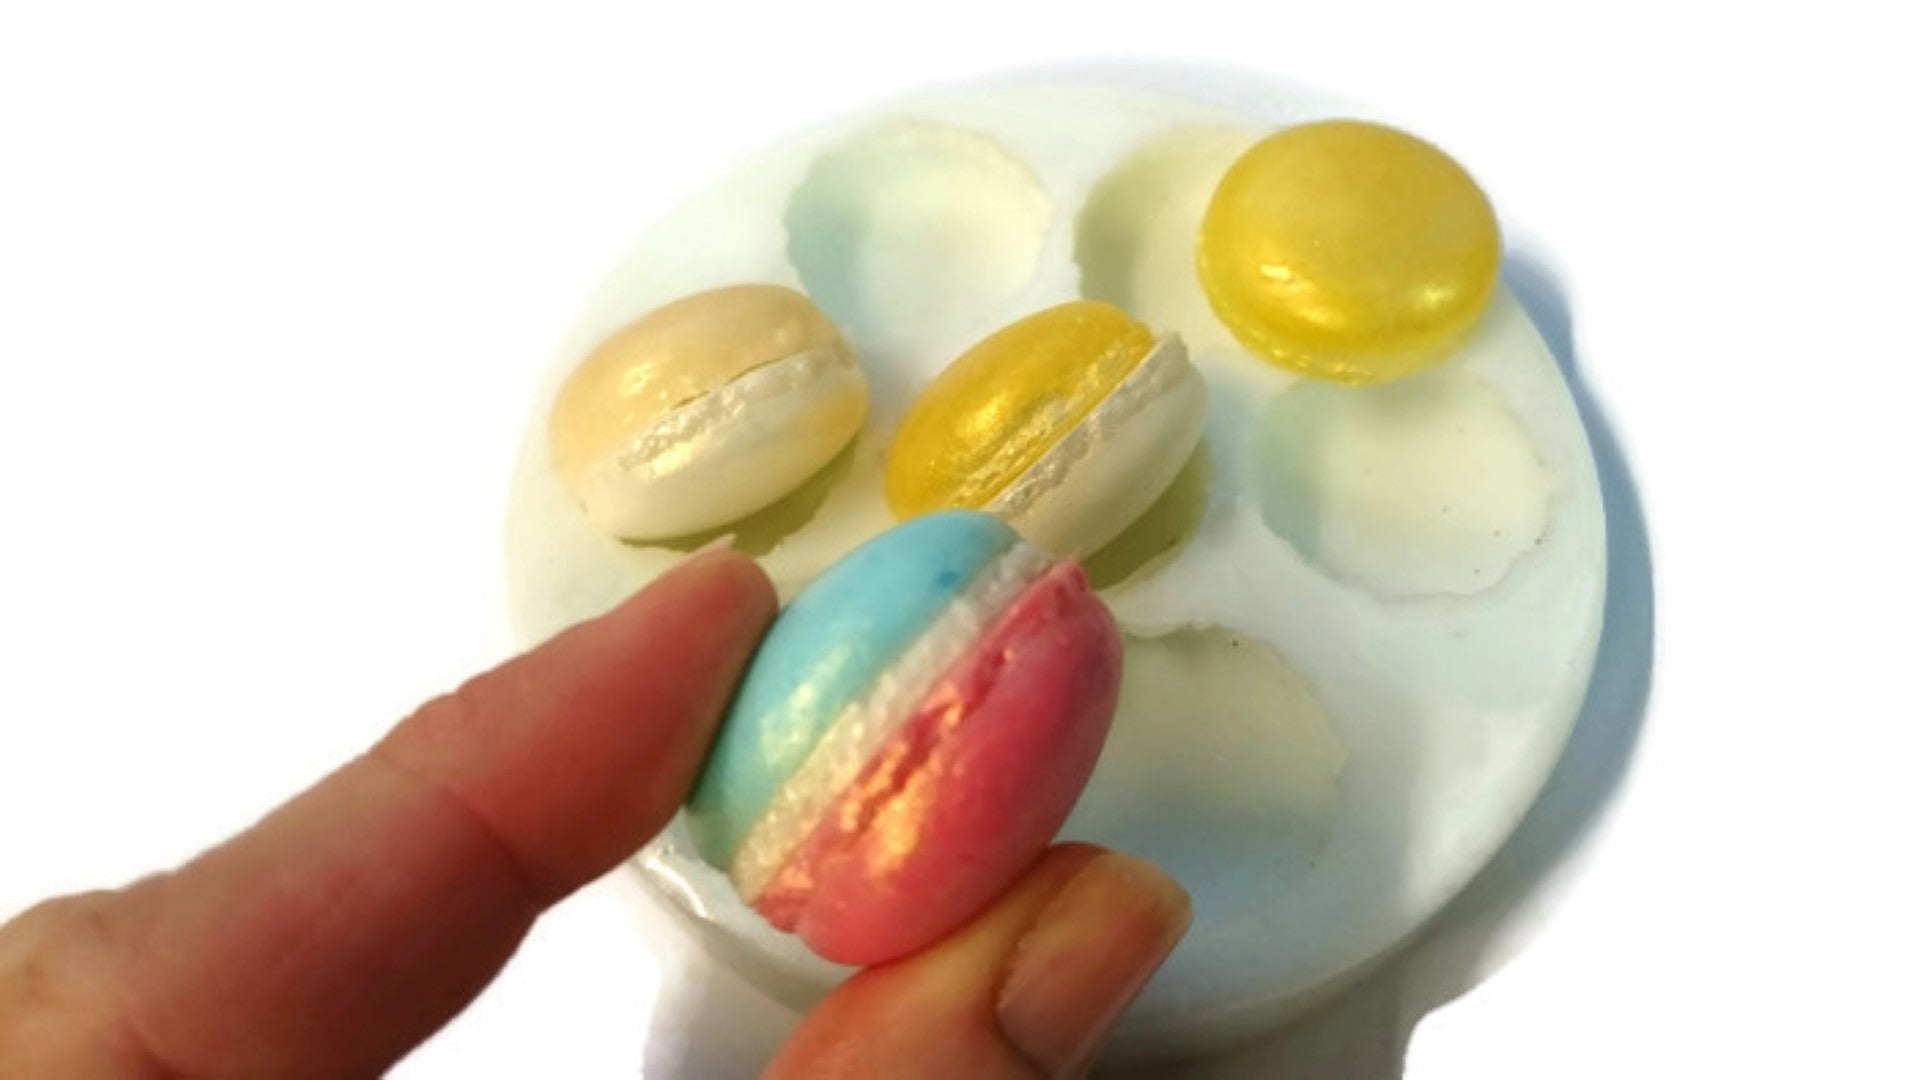 Macaron Small (7 Cavities) Silicone Mould